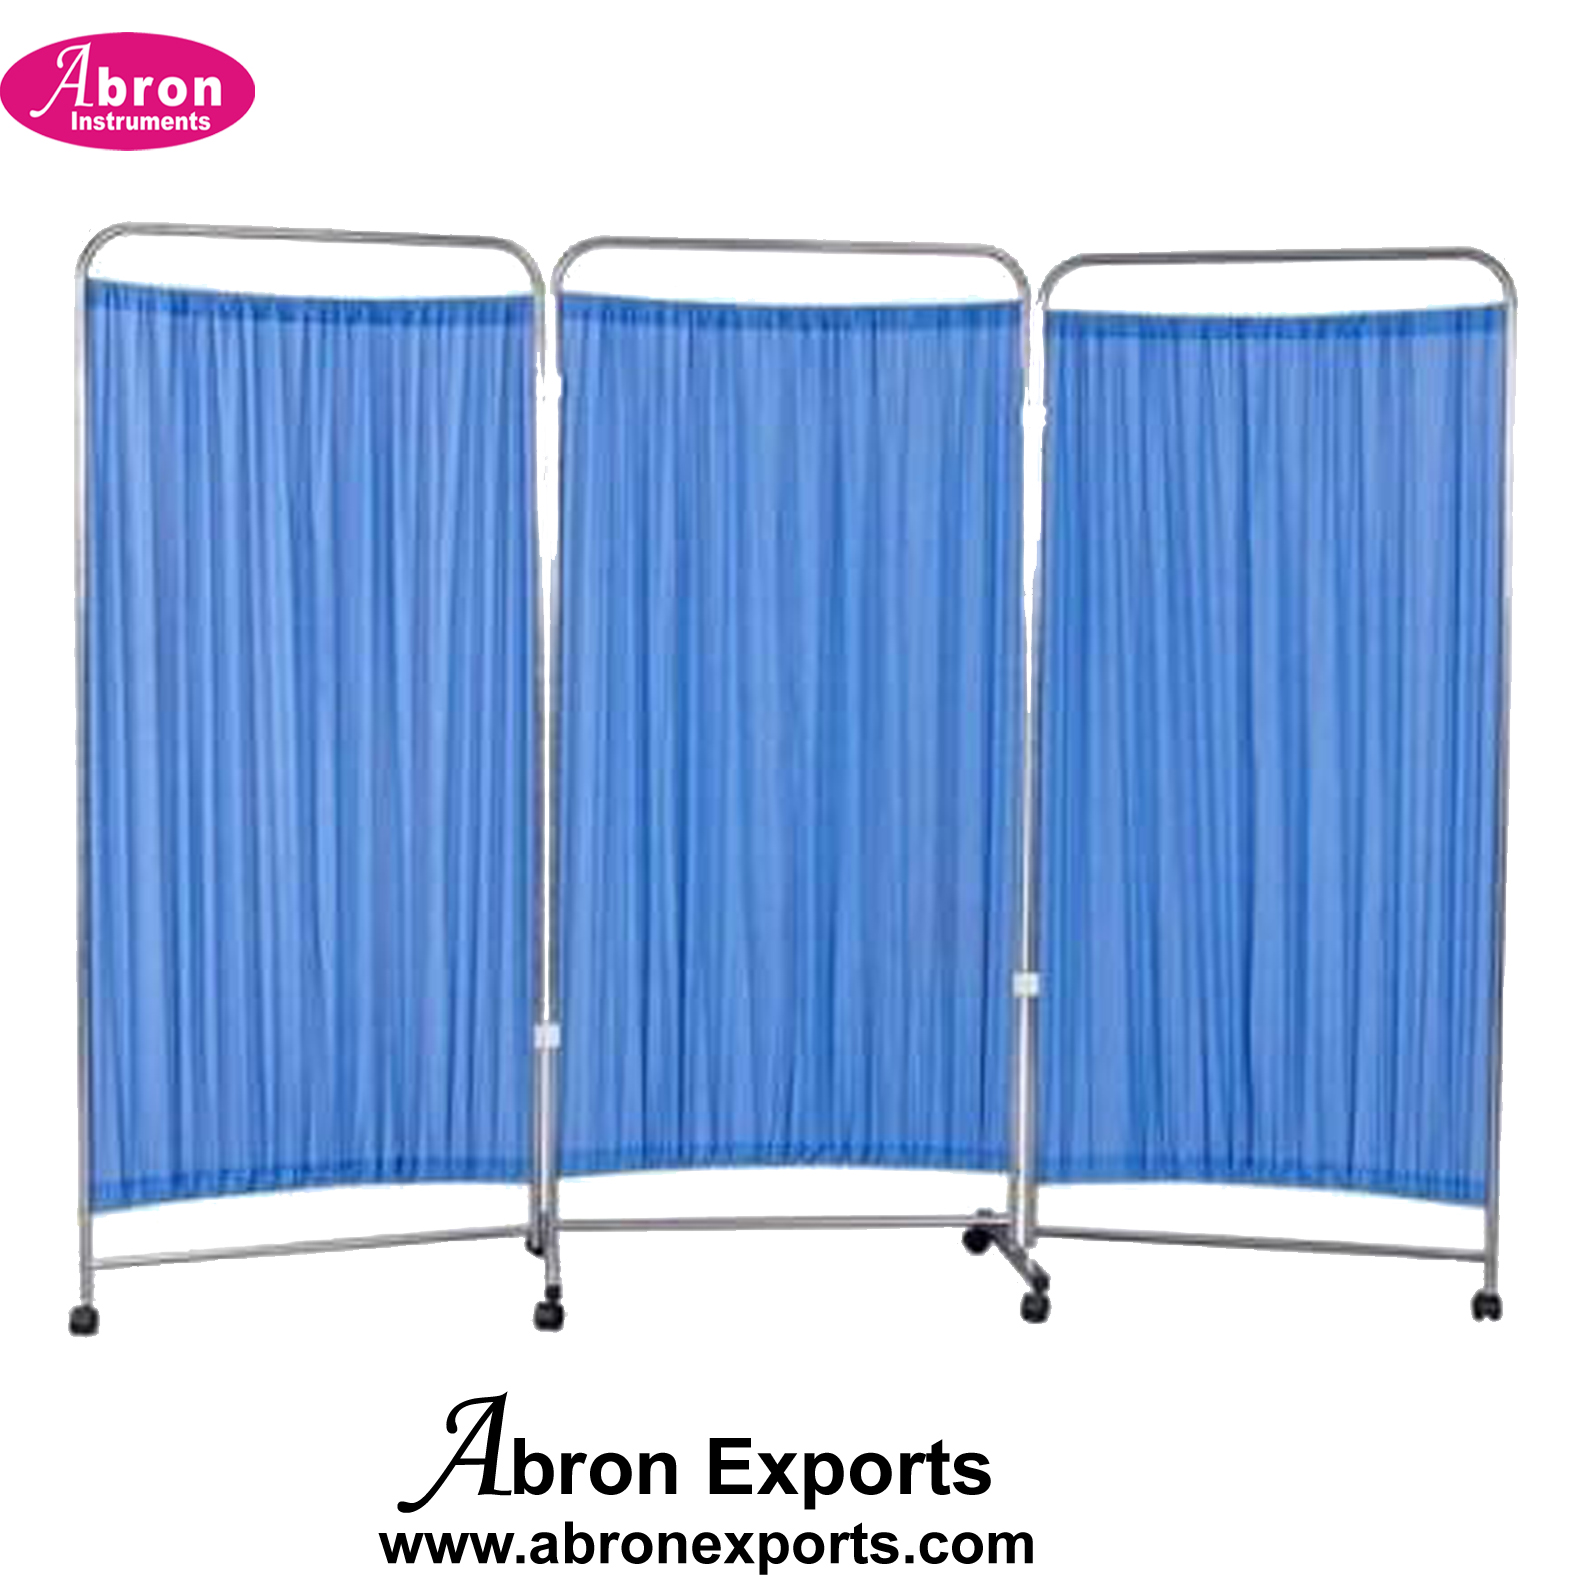 Hospital Medical bedside screens 3-4 four x2 feet partion with curtons steel frame with wheels Abron ABM-2355-S3PB 